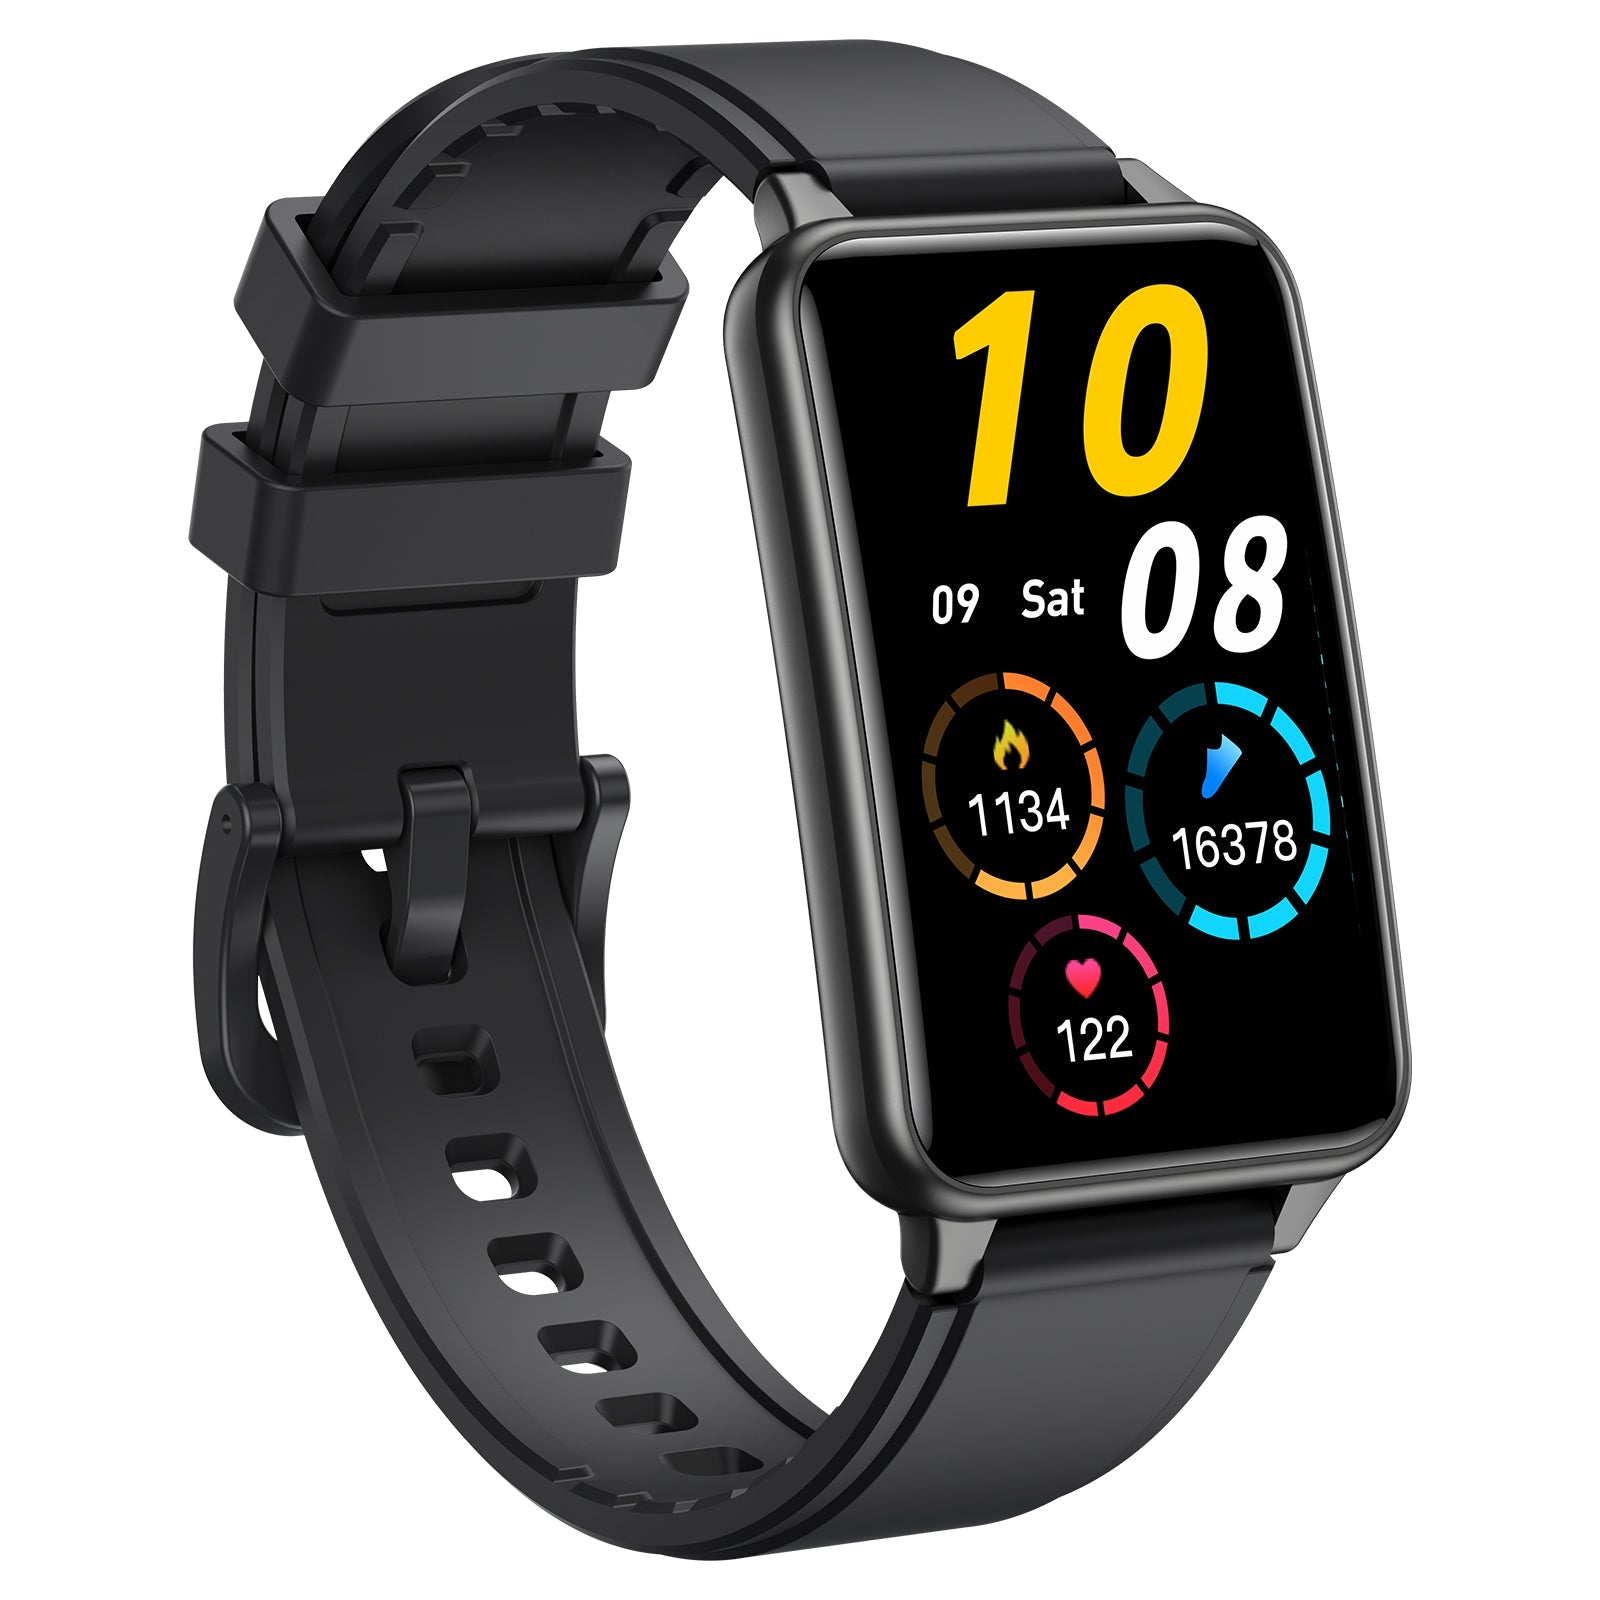 SKG Smart Watch, Fitness Tracker with Health Monitor for Heart Rate, Blood Oxygen, Sleep,Touch Screen Bluetooth Smartwatch Fitness Watch for